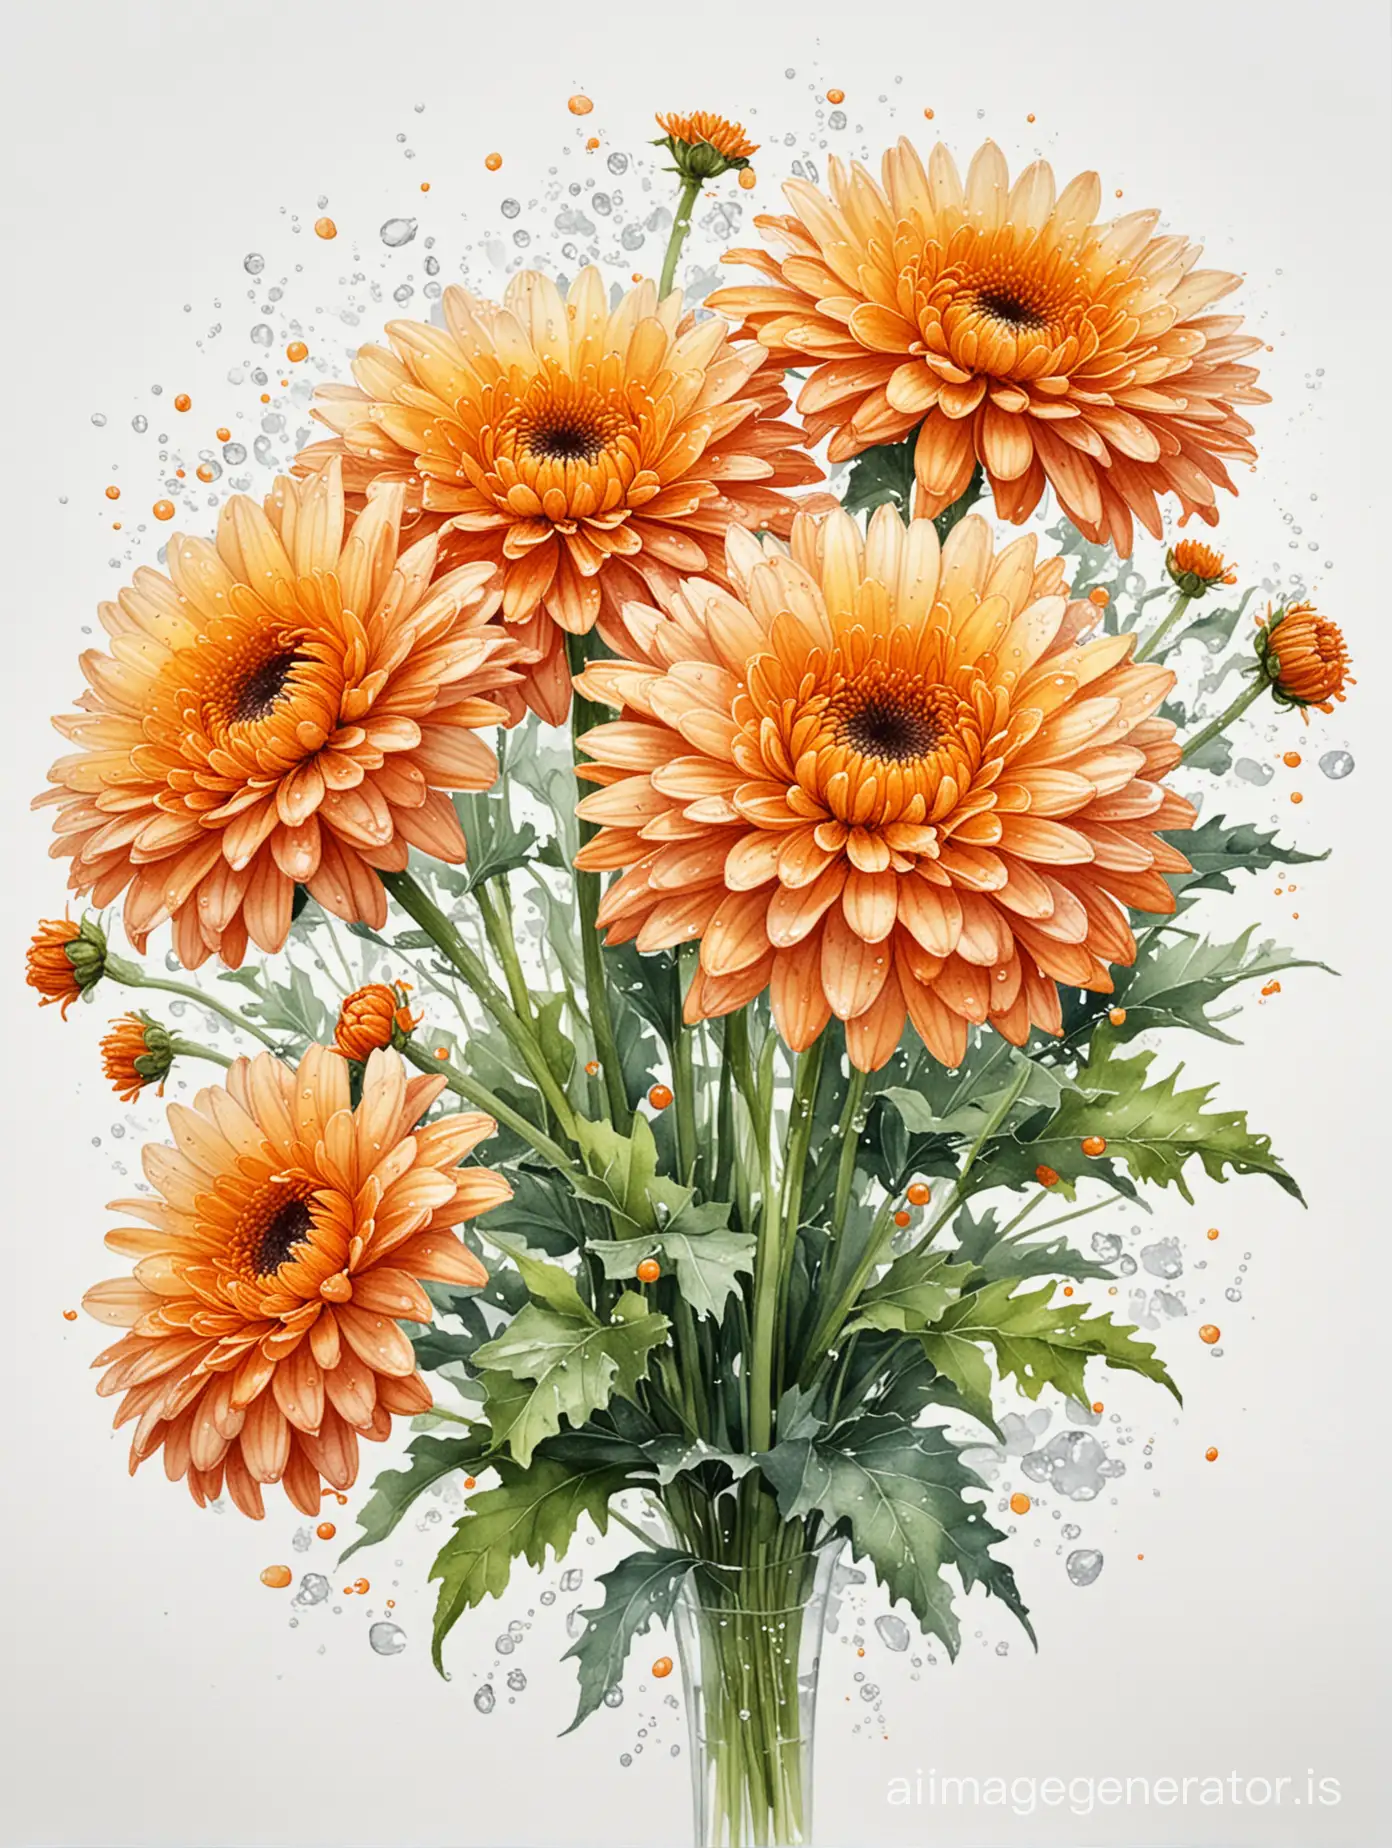 Watercolour. A gorgeous bouquet of orange terry chrysanthemums with transparent dew drops on a white background